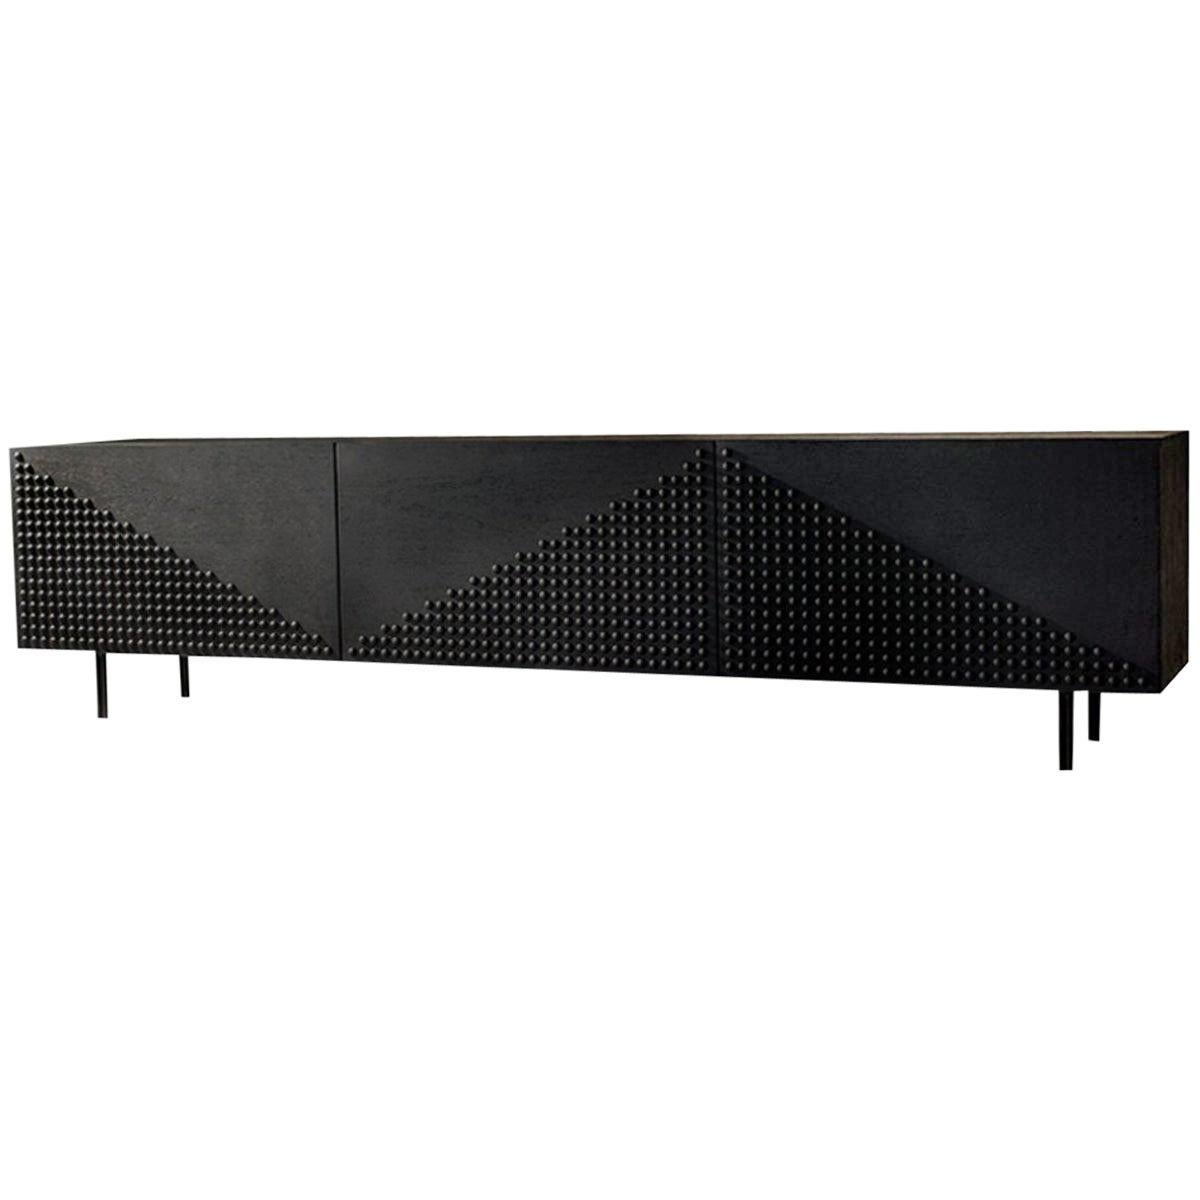 Just as punk fashion made the 1970's cool yet never really mainstream, this all black riveted high-end cabinet designed by Larissa Batista is a blastoff from her design studio to the world. When set out to design the Tigah collection, Larissa